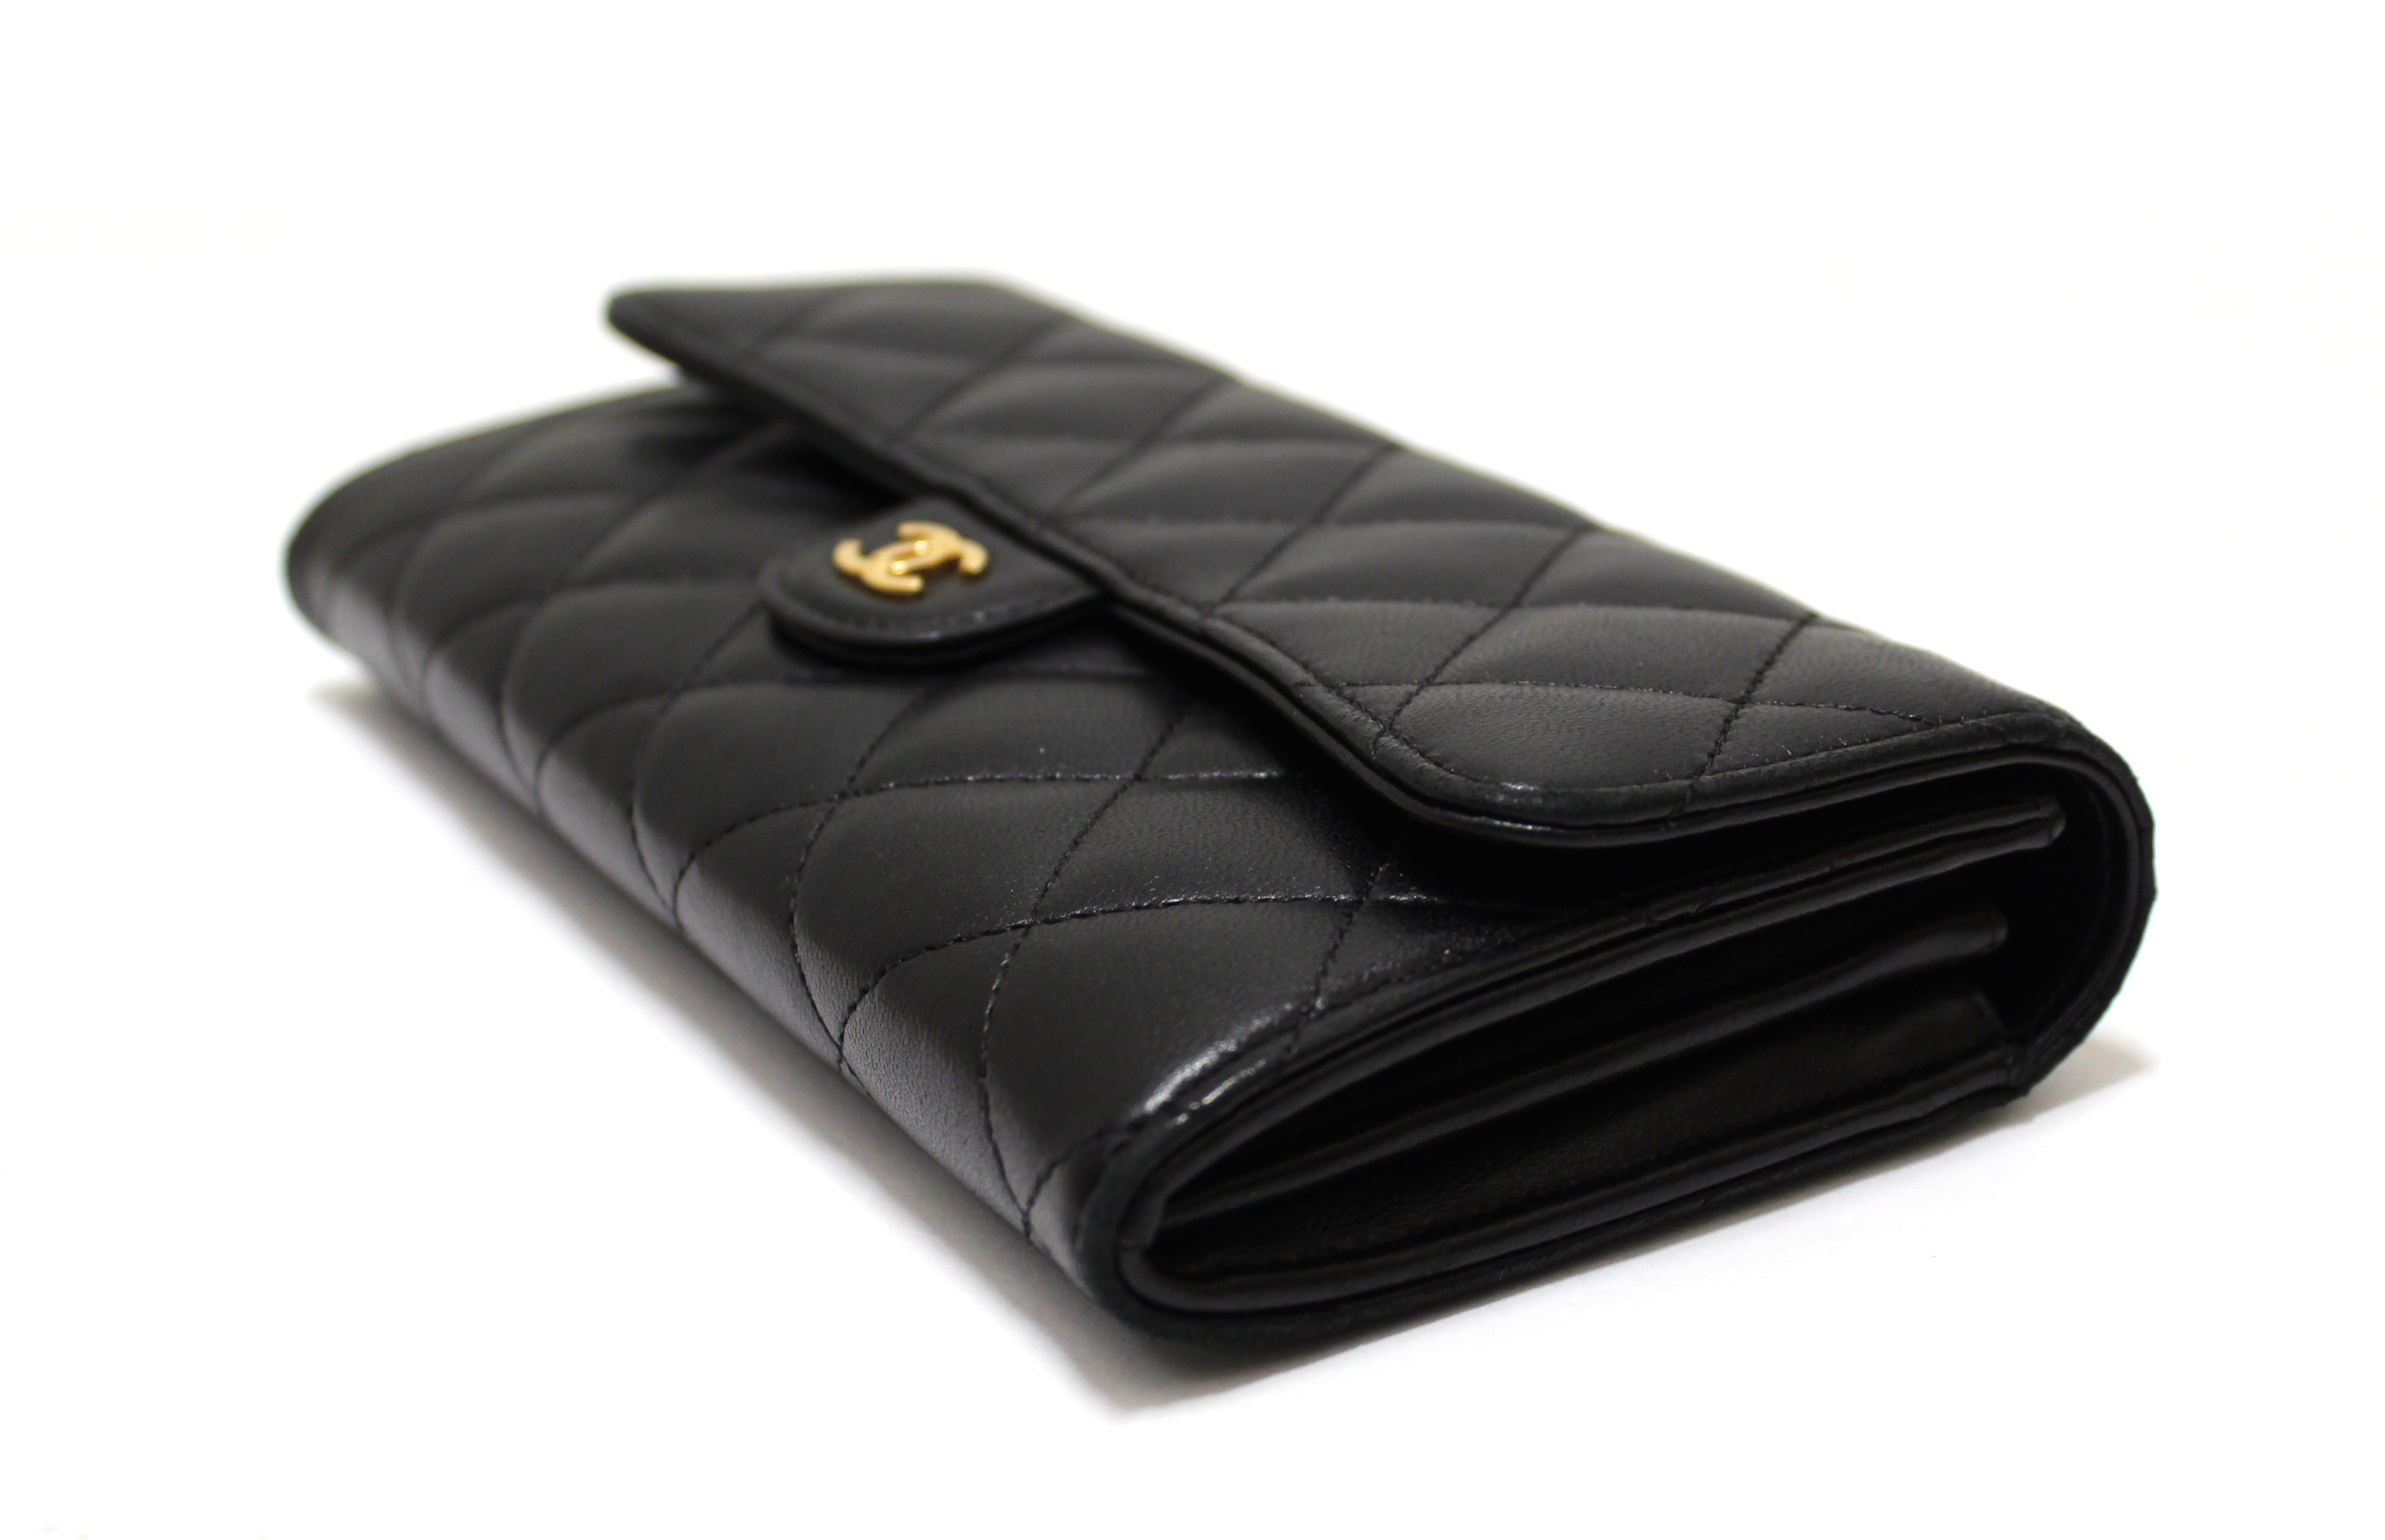 Authentic Chanel Black Quilted Lambskin Leather Classic Flap Long Wallet